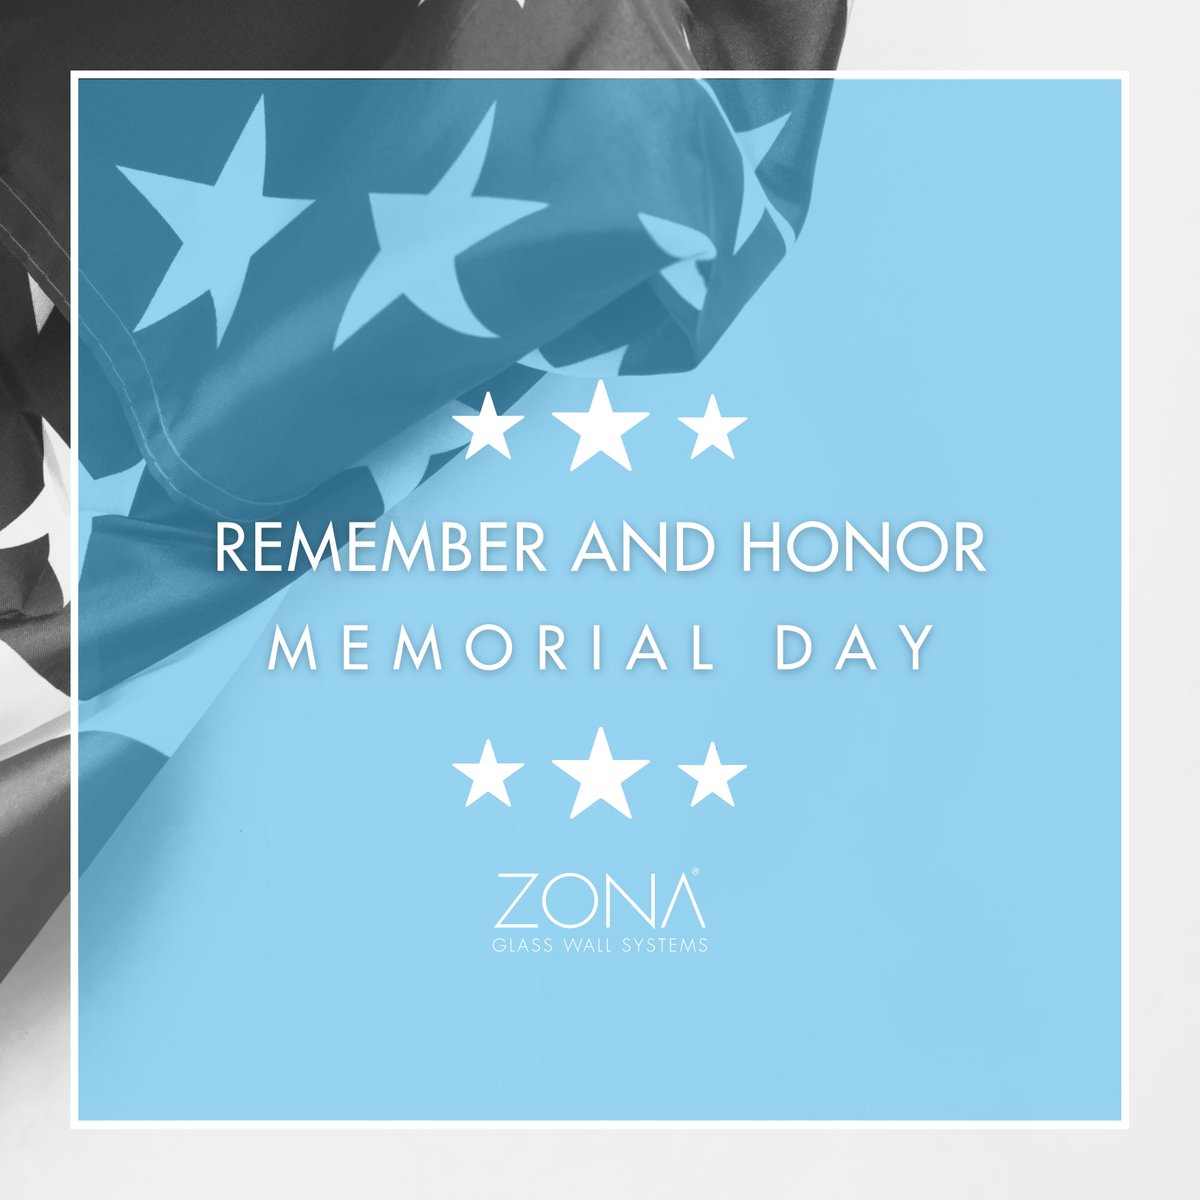 On this day we remember and honor the brave heroes who sacrificed their lives to protect our freedom, today and every day we express our sincere gratitude.
   
#memorialday #zona #honoringthebrave #madeintheusa #whyzona